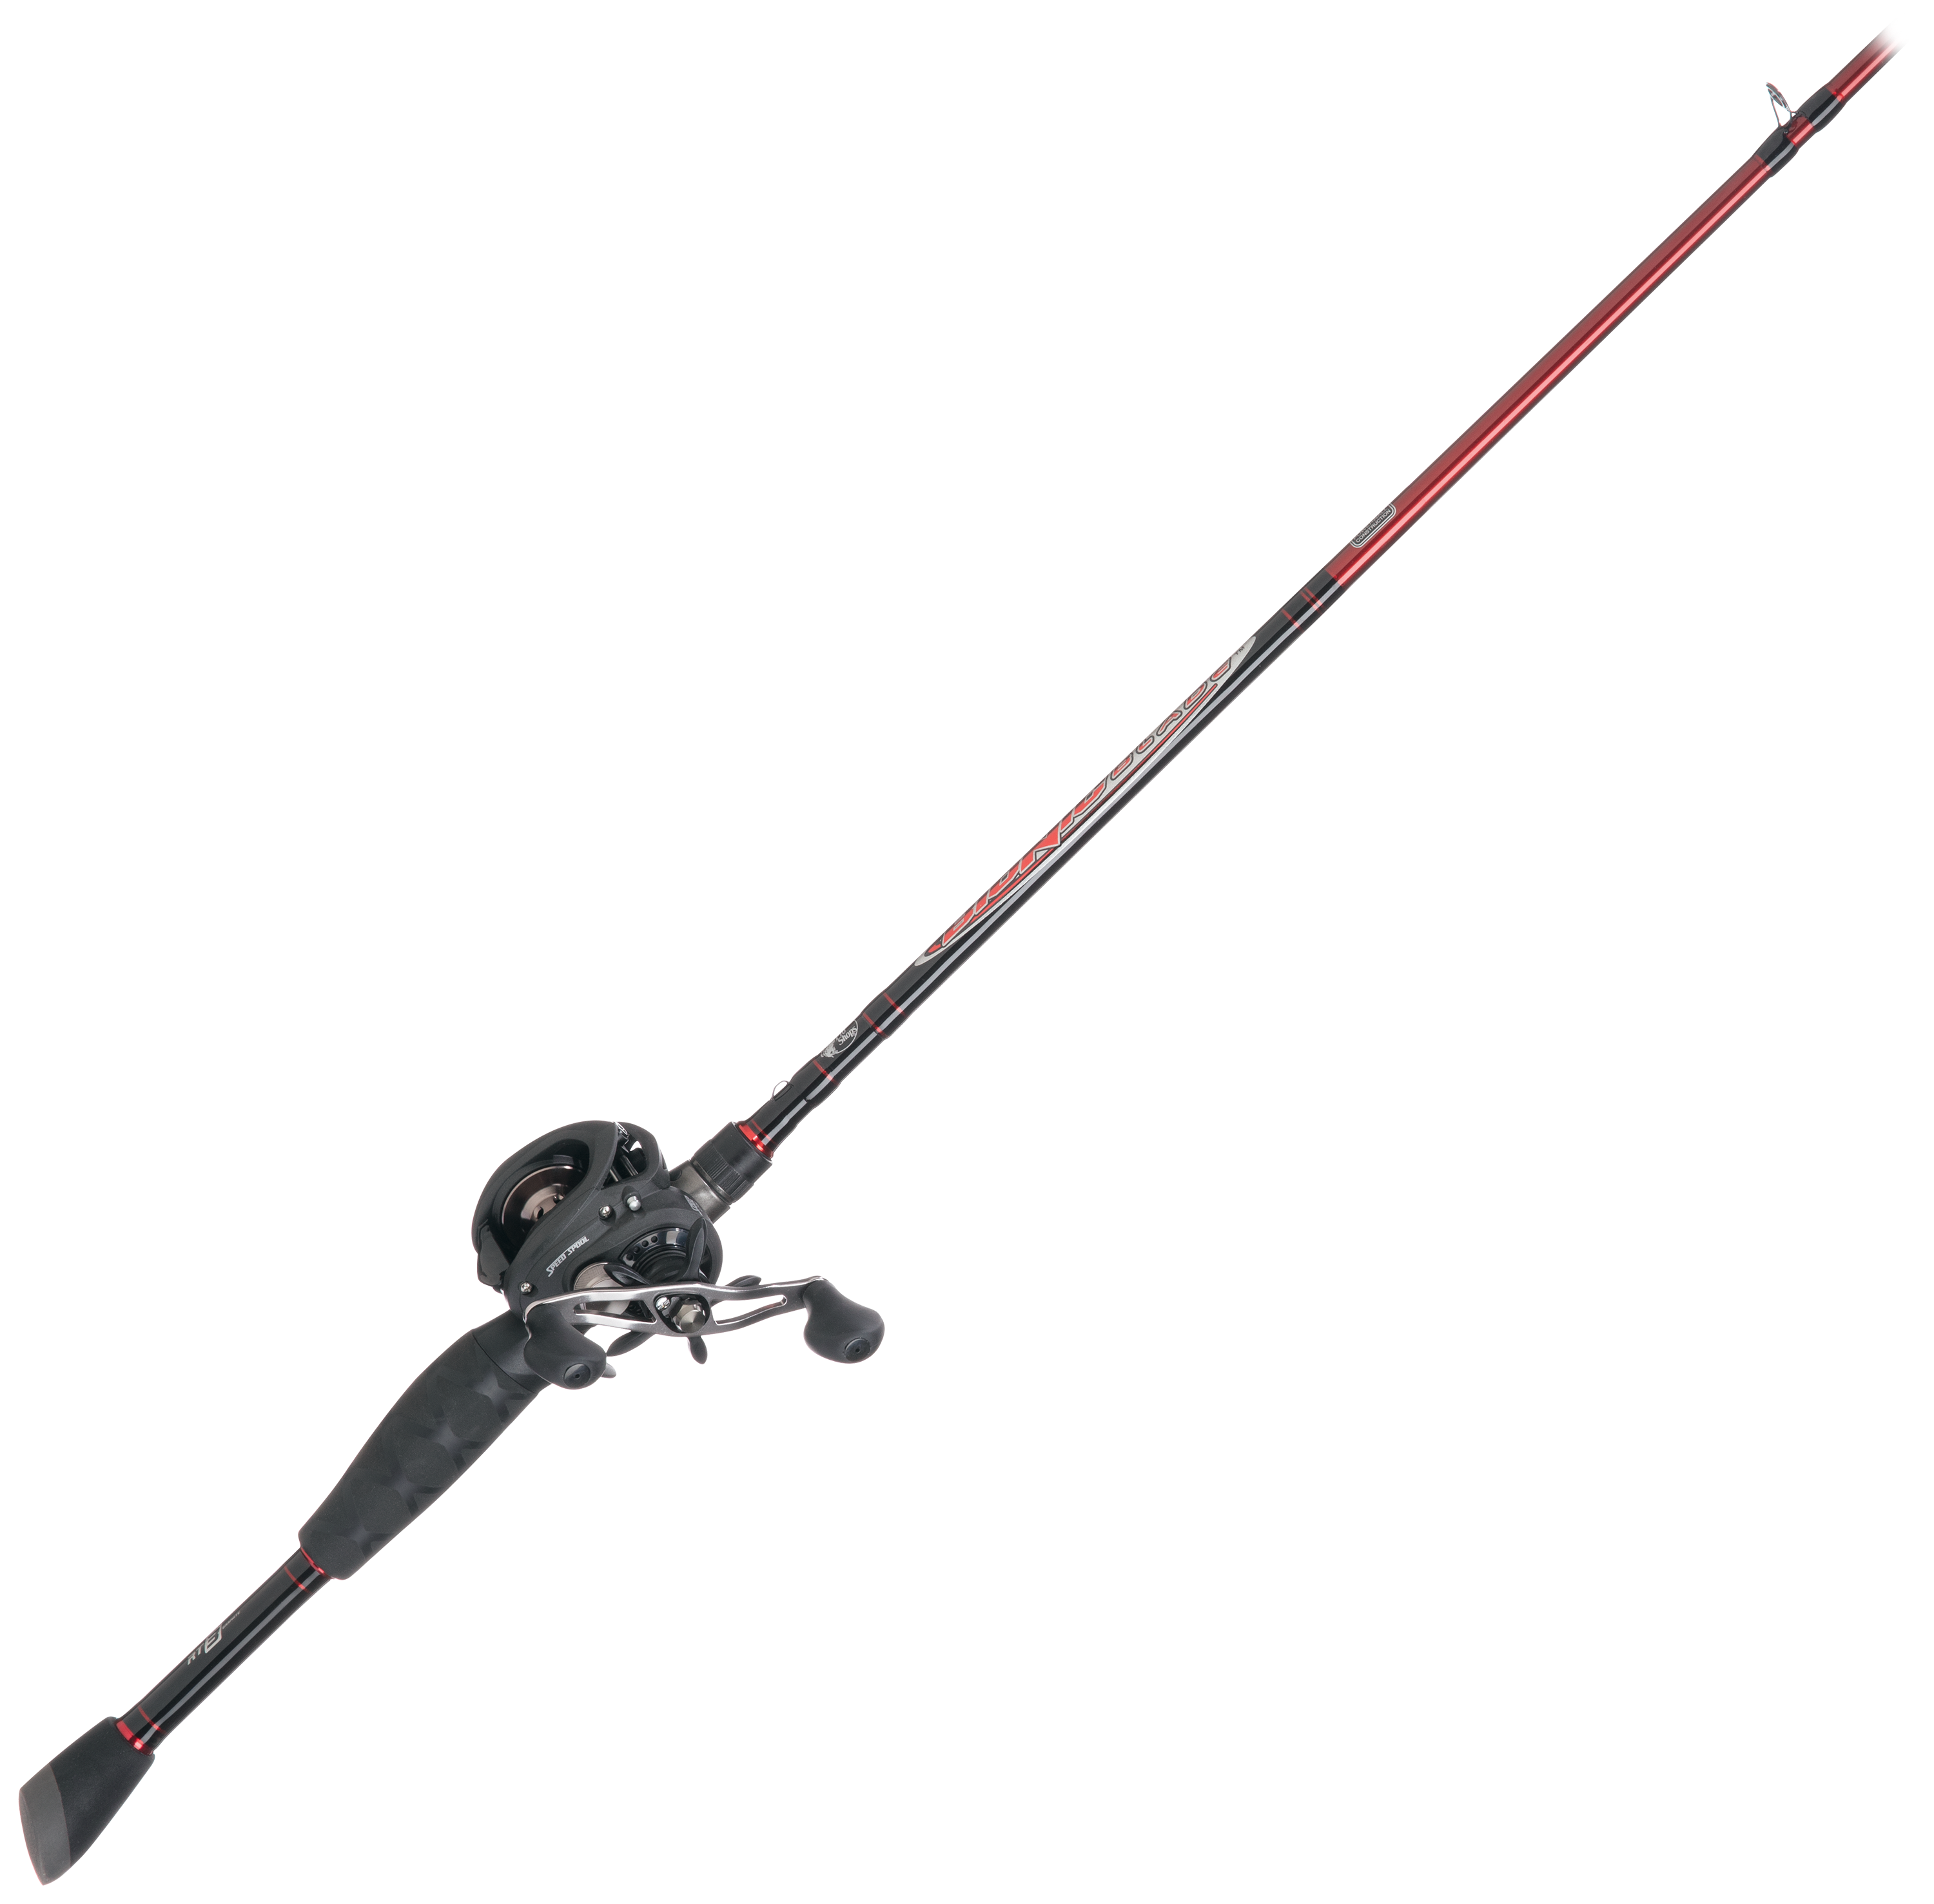 Lew's Speed Spool LFS/Bass Pro Shops XPS Bionic Blade Casting Rod And Reel Combo - Right - 7'6″ - Medium Heavy - 6.8:1